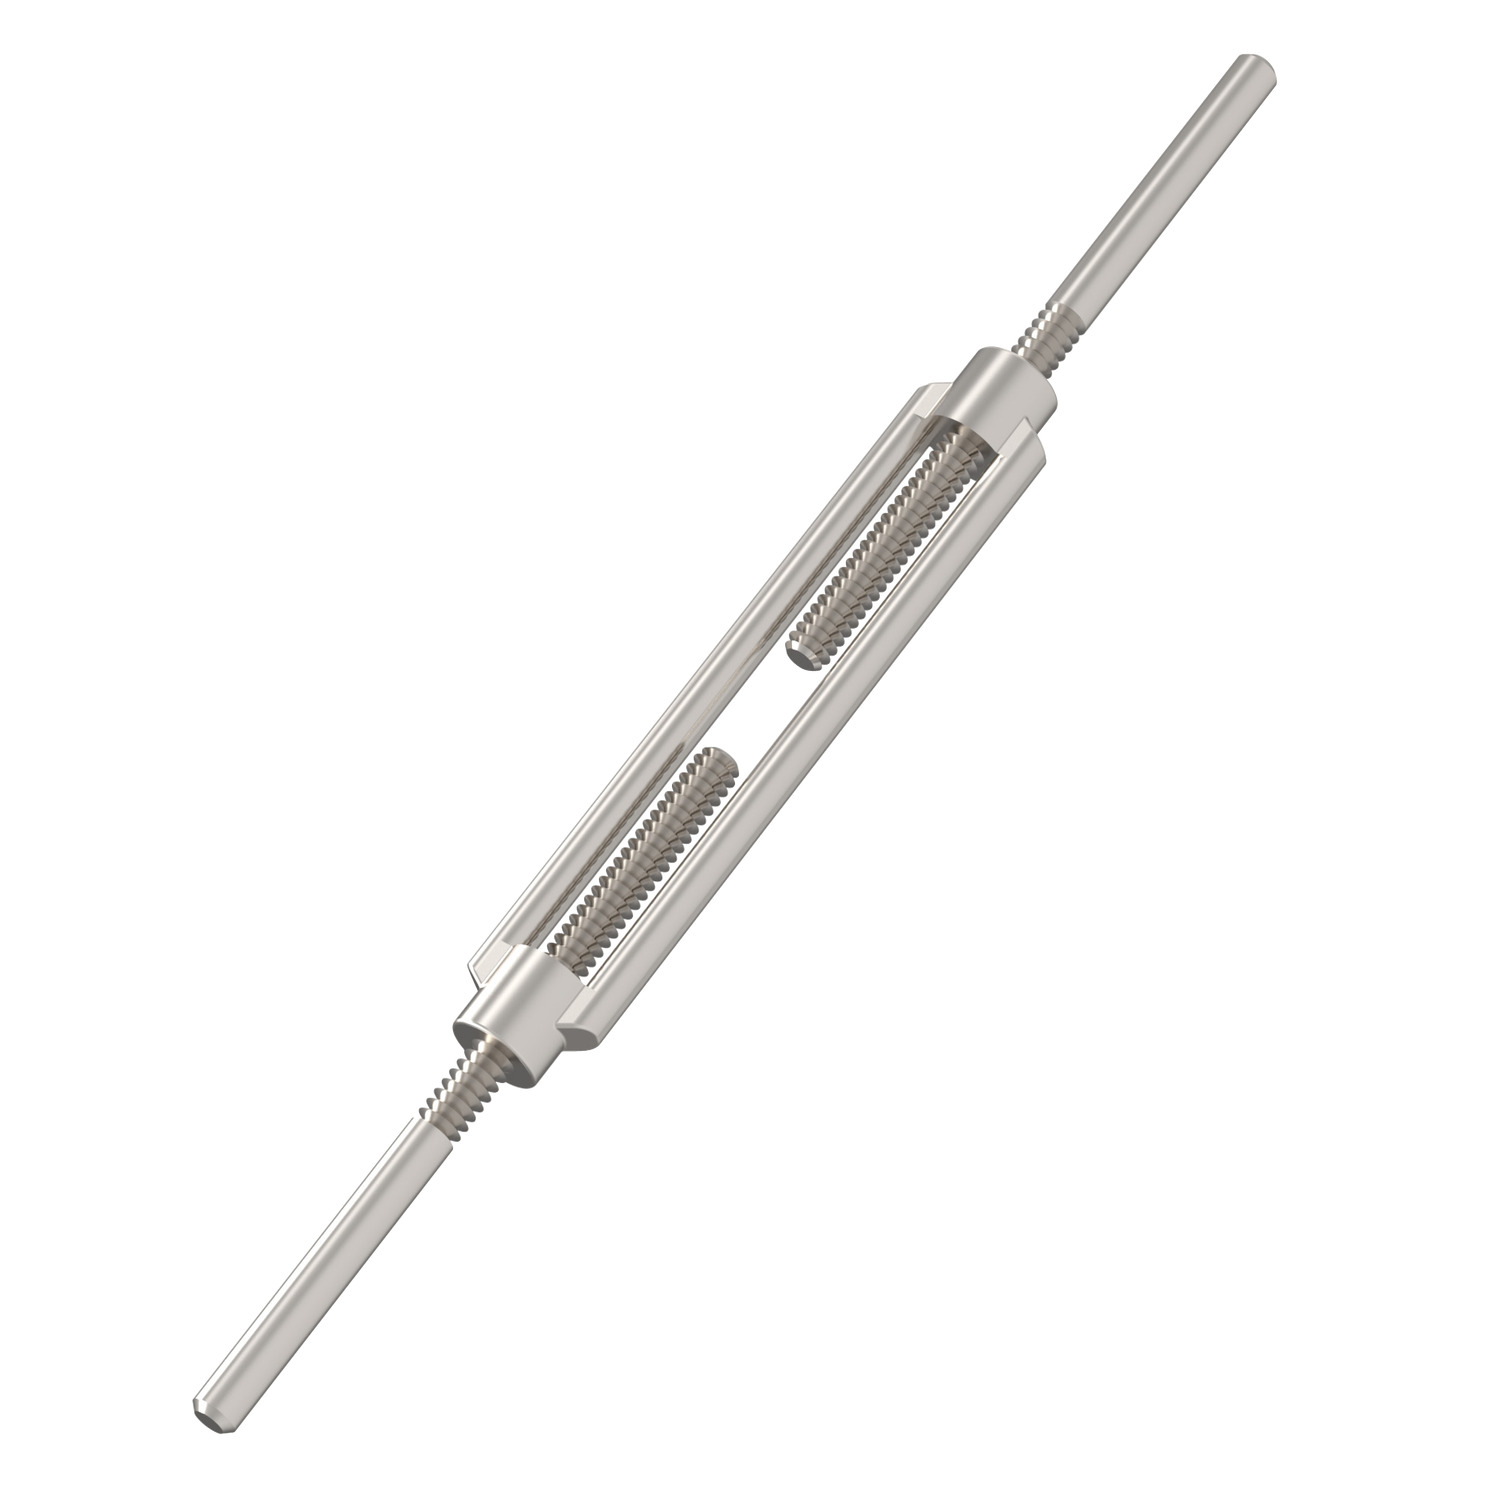 Stub End Turnbuckles A4 Stainless steel open turnbuckles with stub end. Manufactured to DIN 1480 stub end. Sizes from M6 to M24. Lengths from 110mm to 255mm.